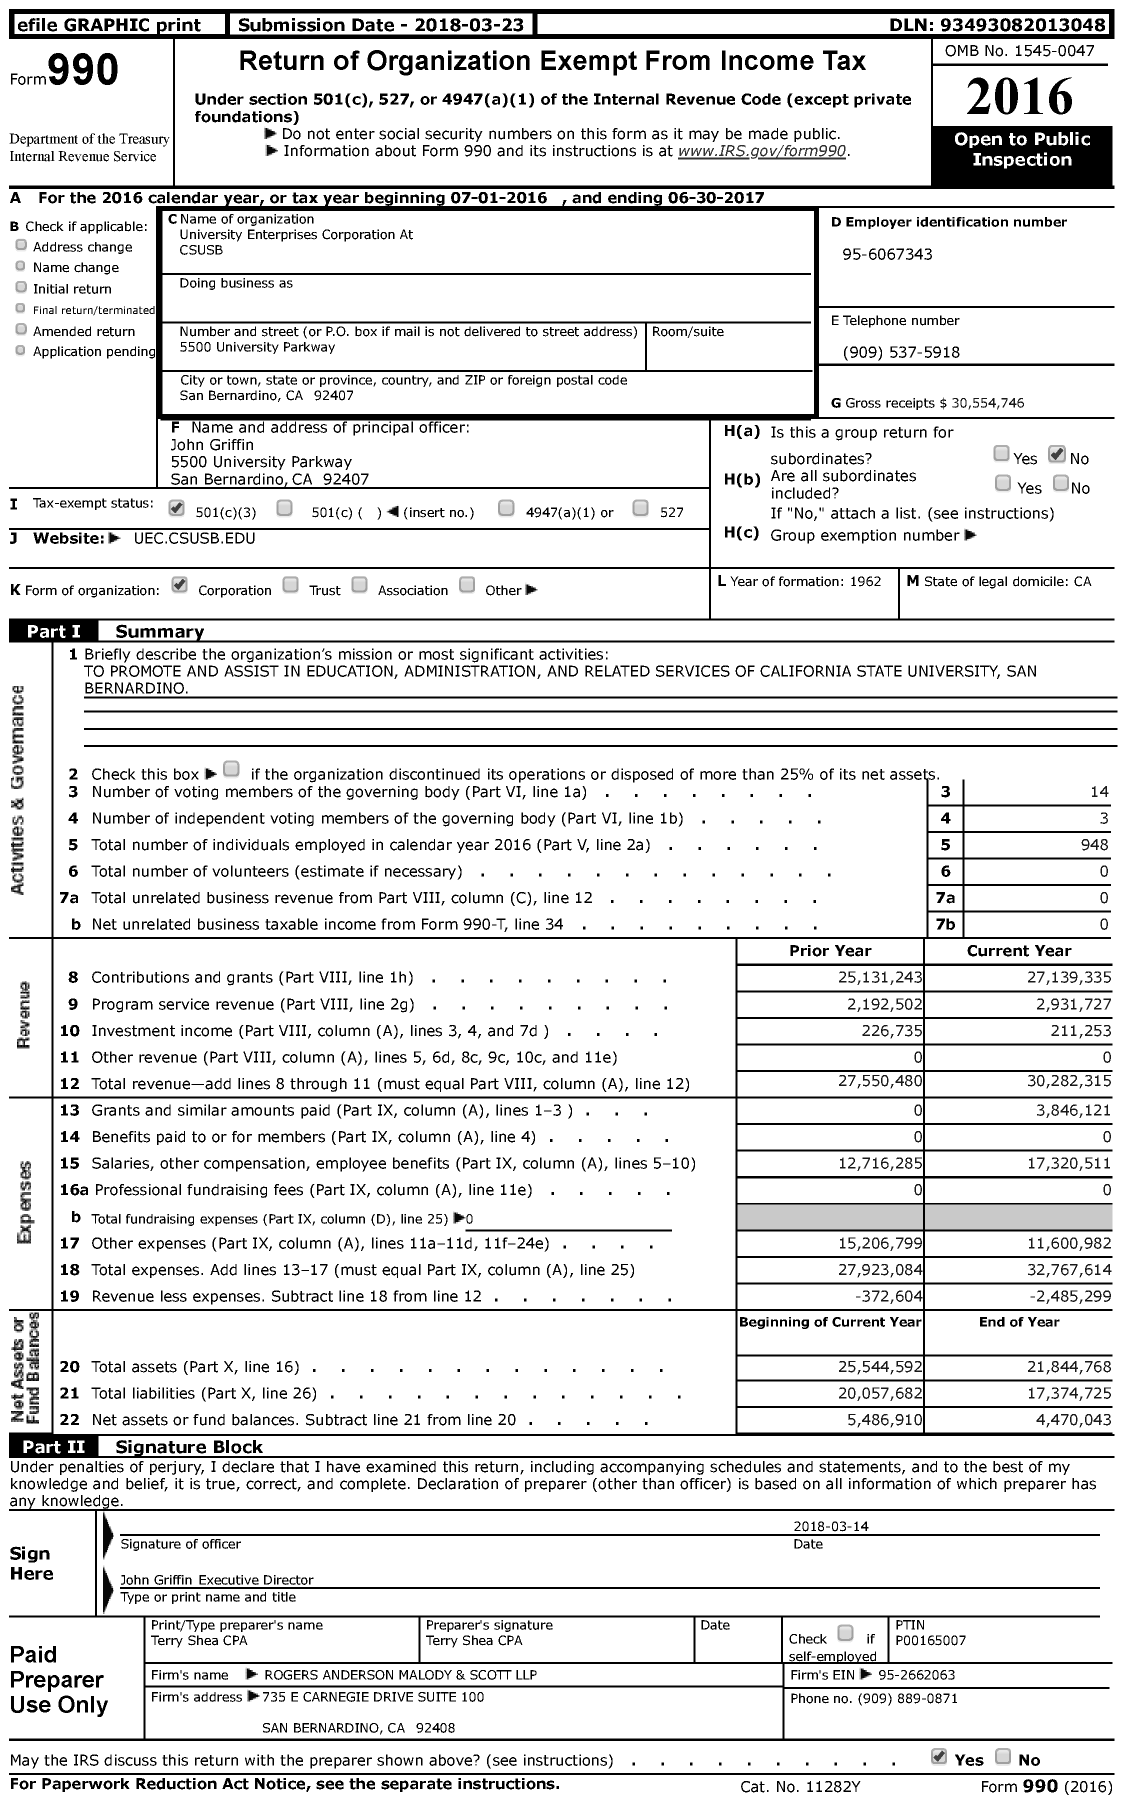 Image of first page of 2016 Form 990 for University Enterprises Corporation at CSUSB (UEC)